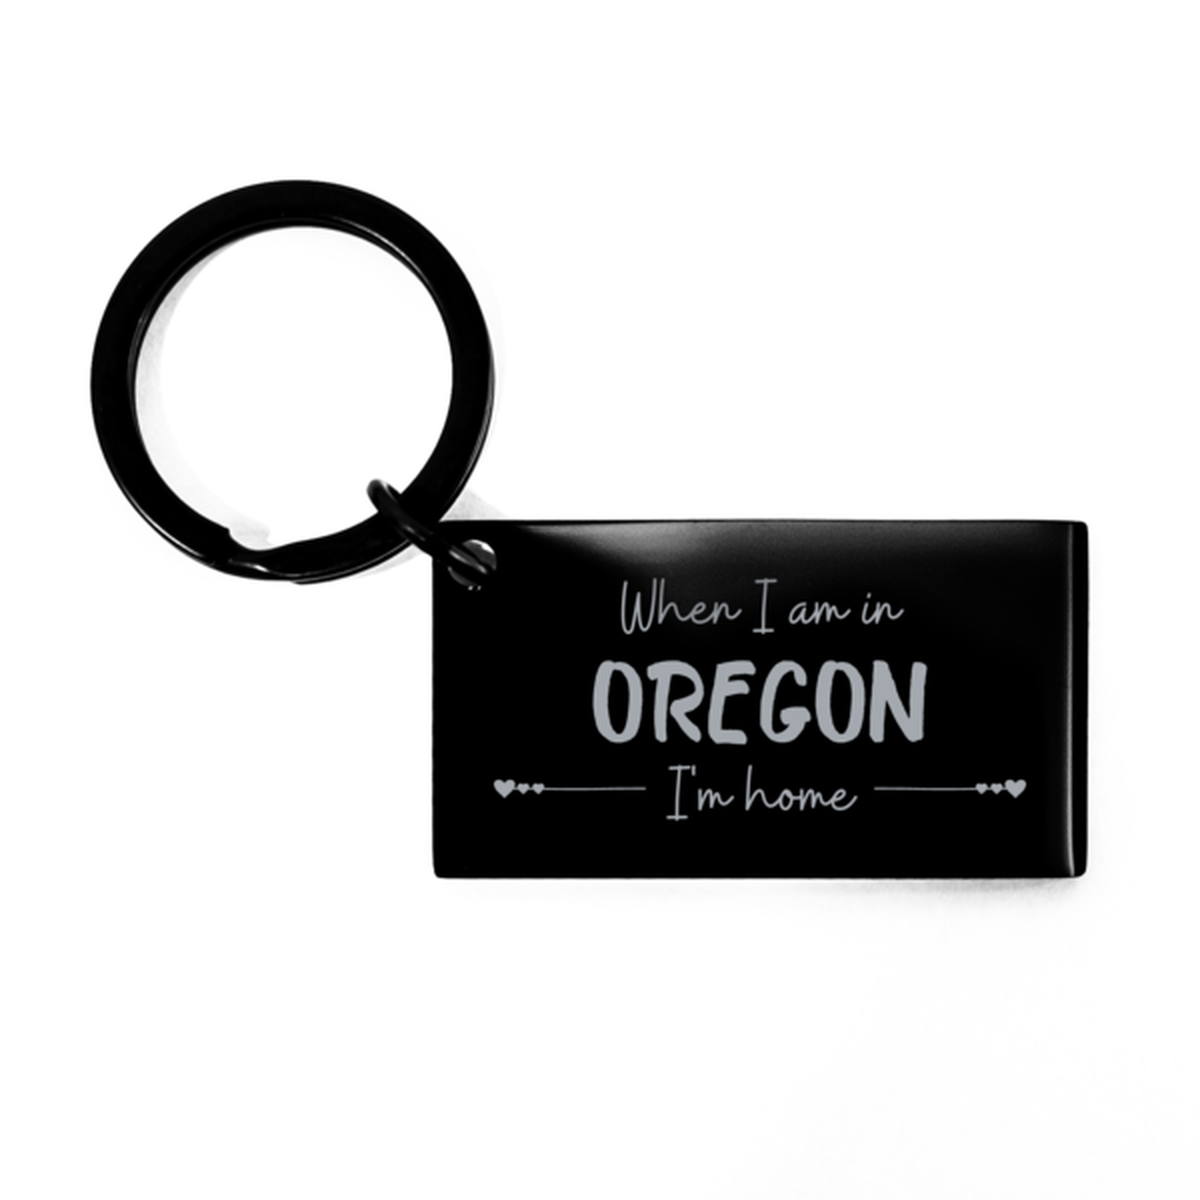 When I am in Oregon I'm home Keychain, Cheap Gifts For Oregon, State Oregon Birthday Gifts for Friends Coworker